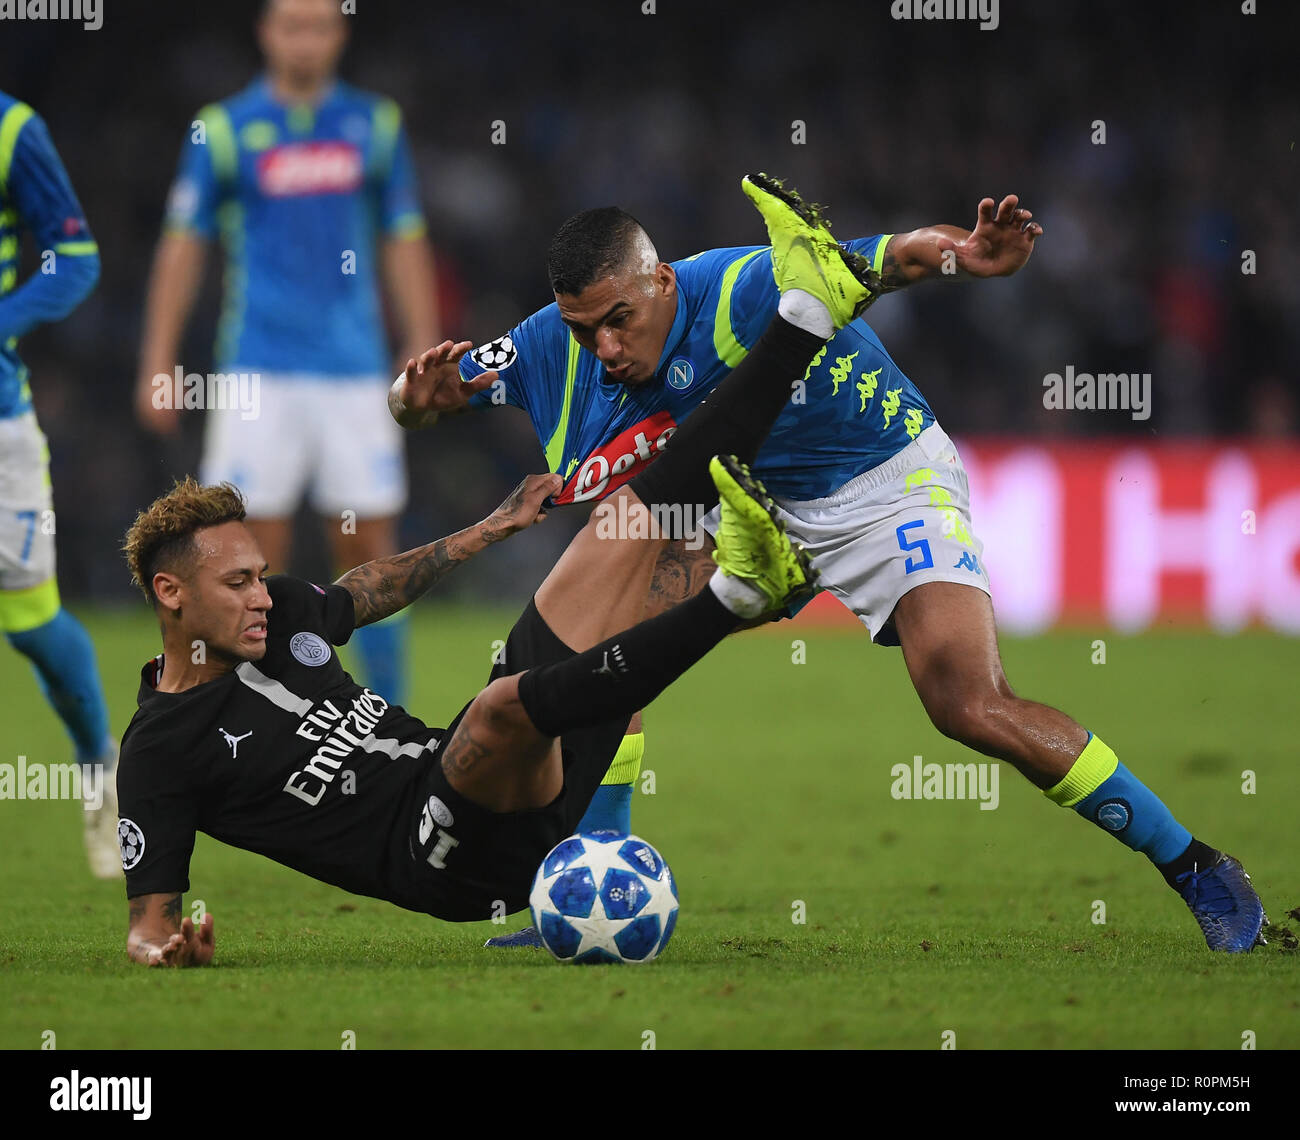 Naples, Italy. 6th Nov, 2018. Paris Saint-Germain's Neymar (L) vies with Napoli's Allan during the UEFA Champions League Group C match between Napoli and PSG in Naples, Italy, Nov. 6, 2018. The match tied 1-1. Credit: Alberto Lingria/Xinhua/Alamy Live News Stock Photo